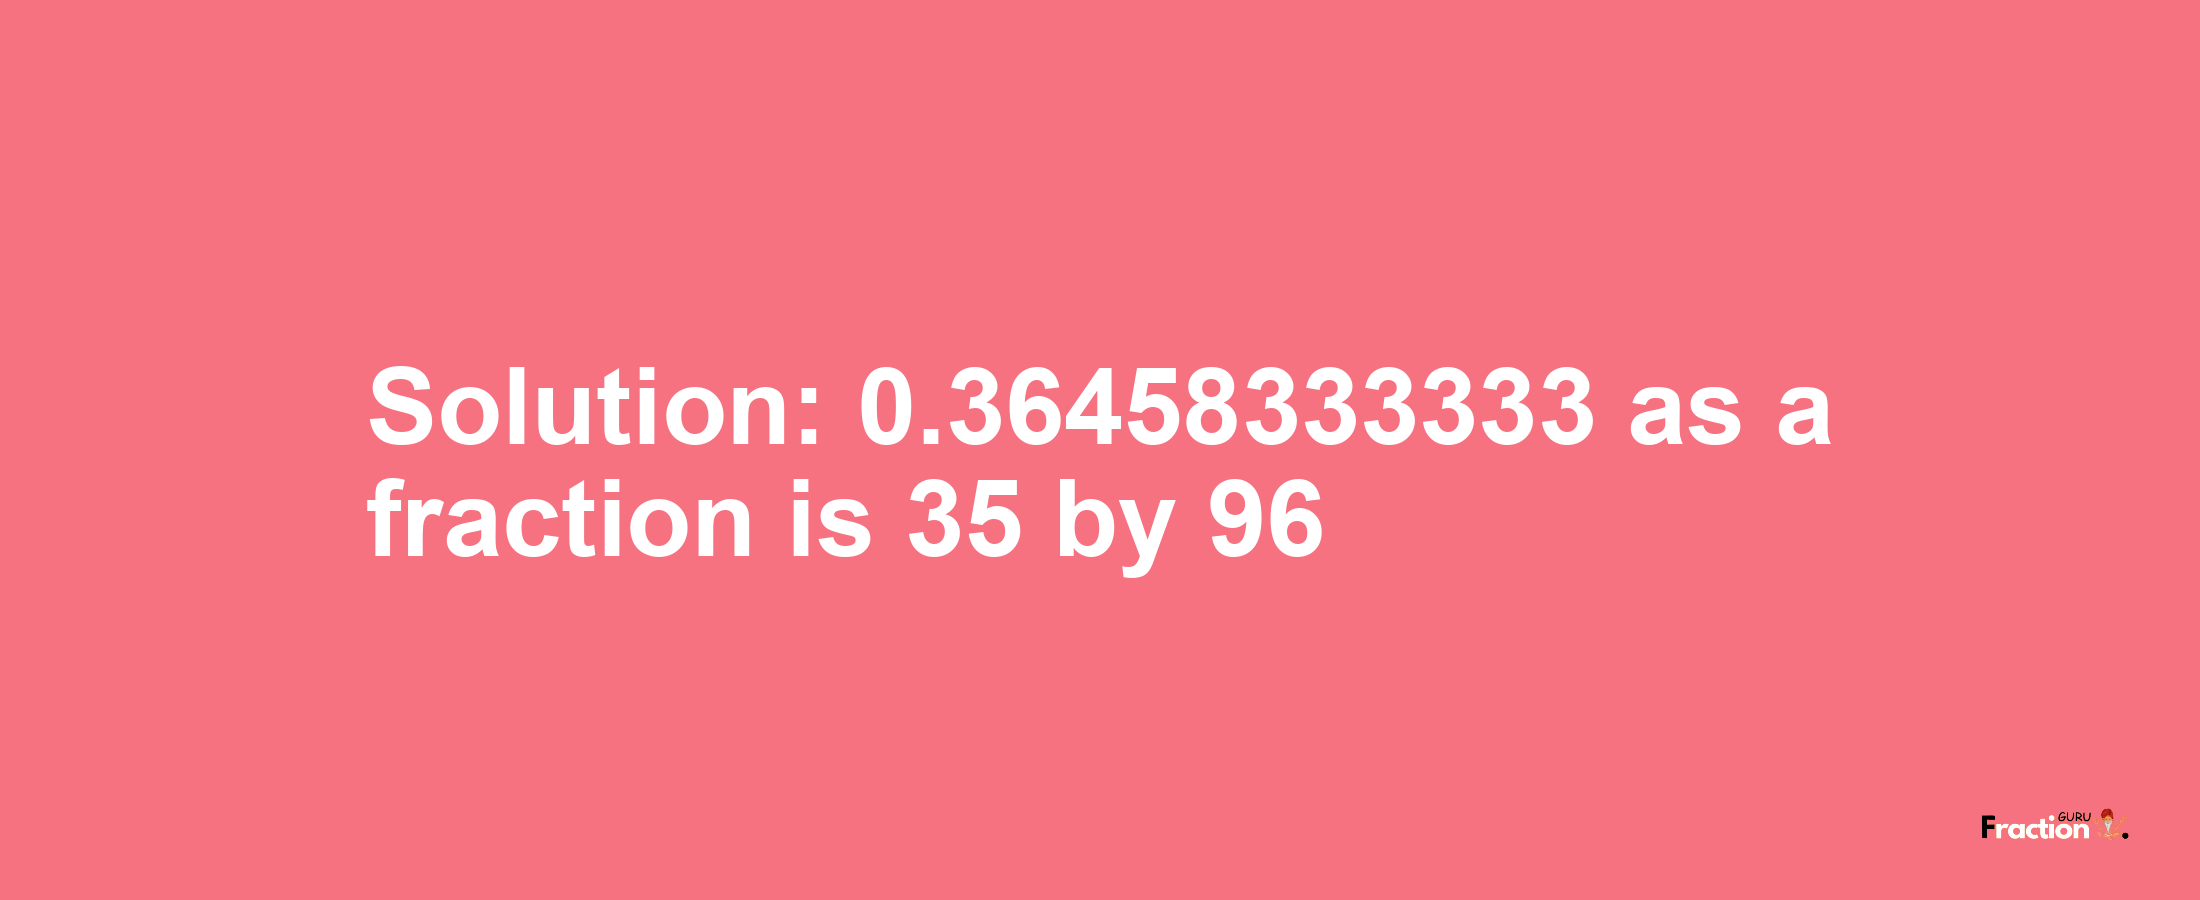 Solution:0.36458333333 as a fraction is 35/96